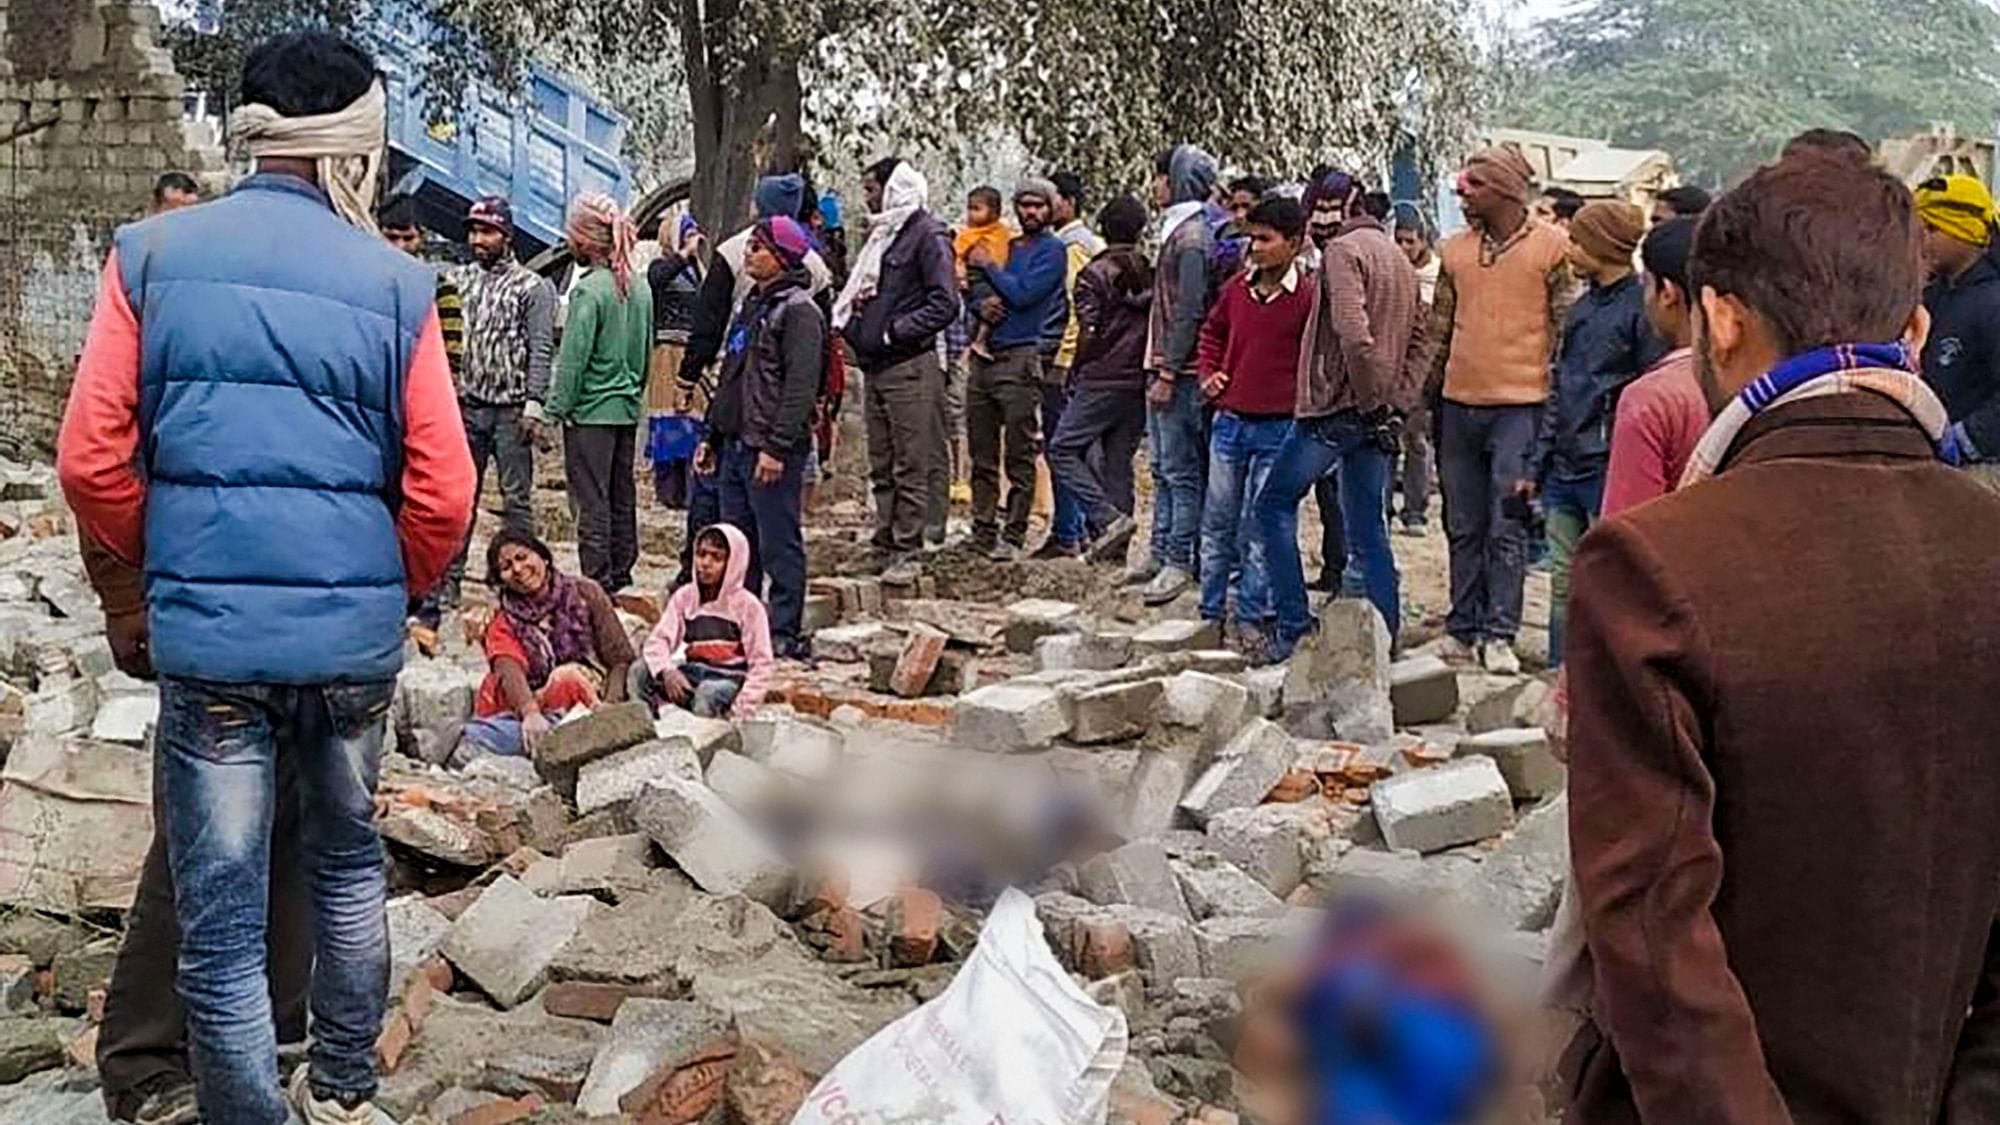 Villagers gather at the site of a wall collapse at Lakshmanpura in Jhansi.